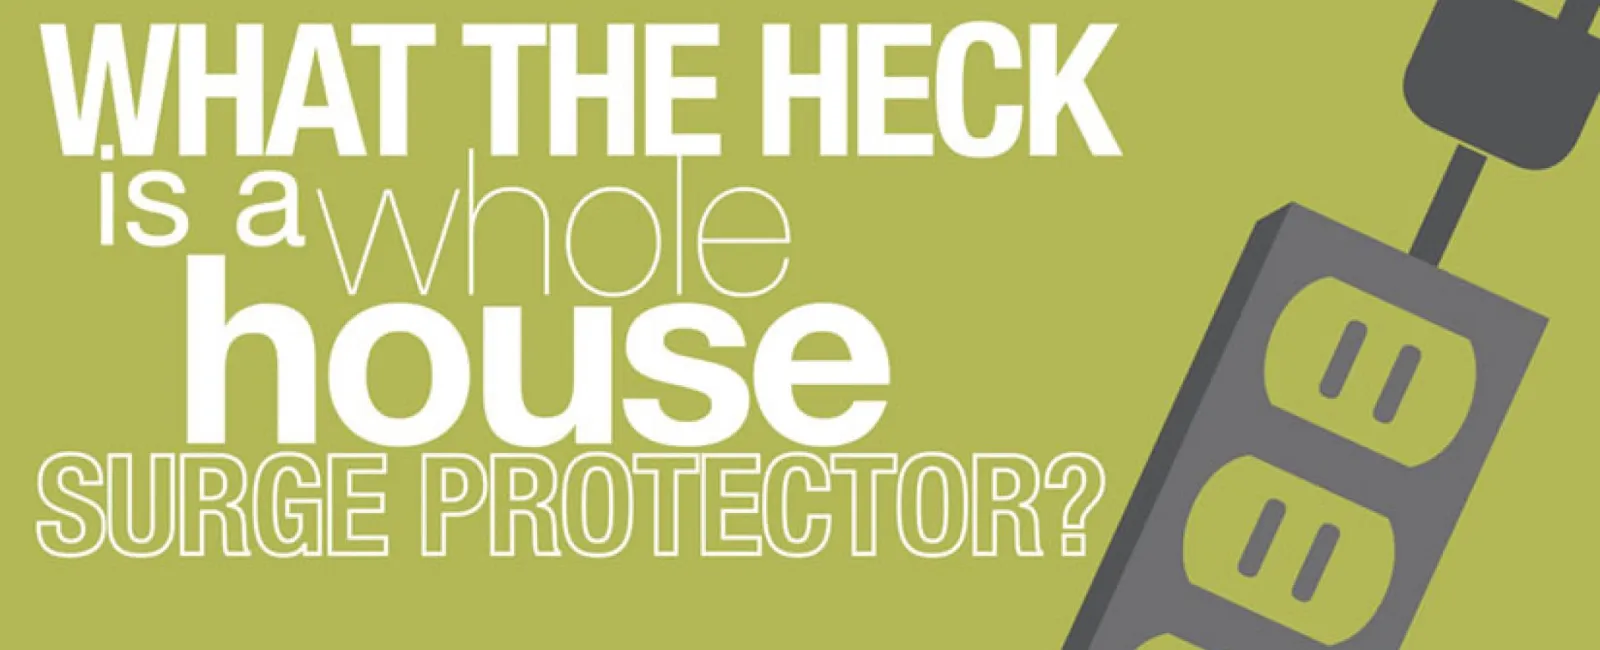 What is Whole House Surge Protector?